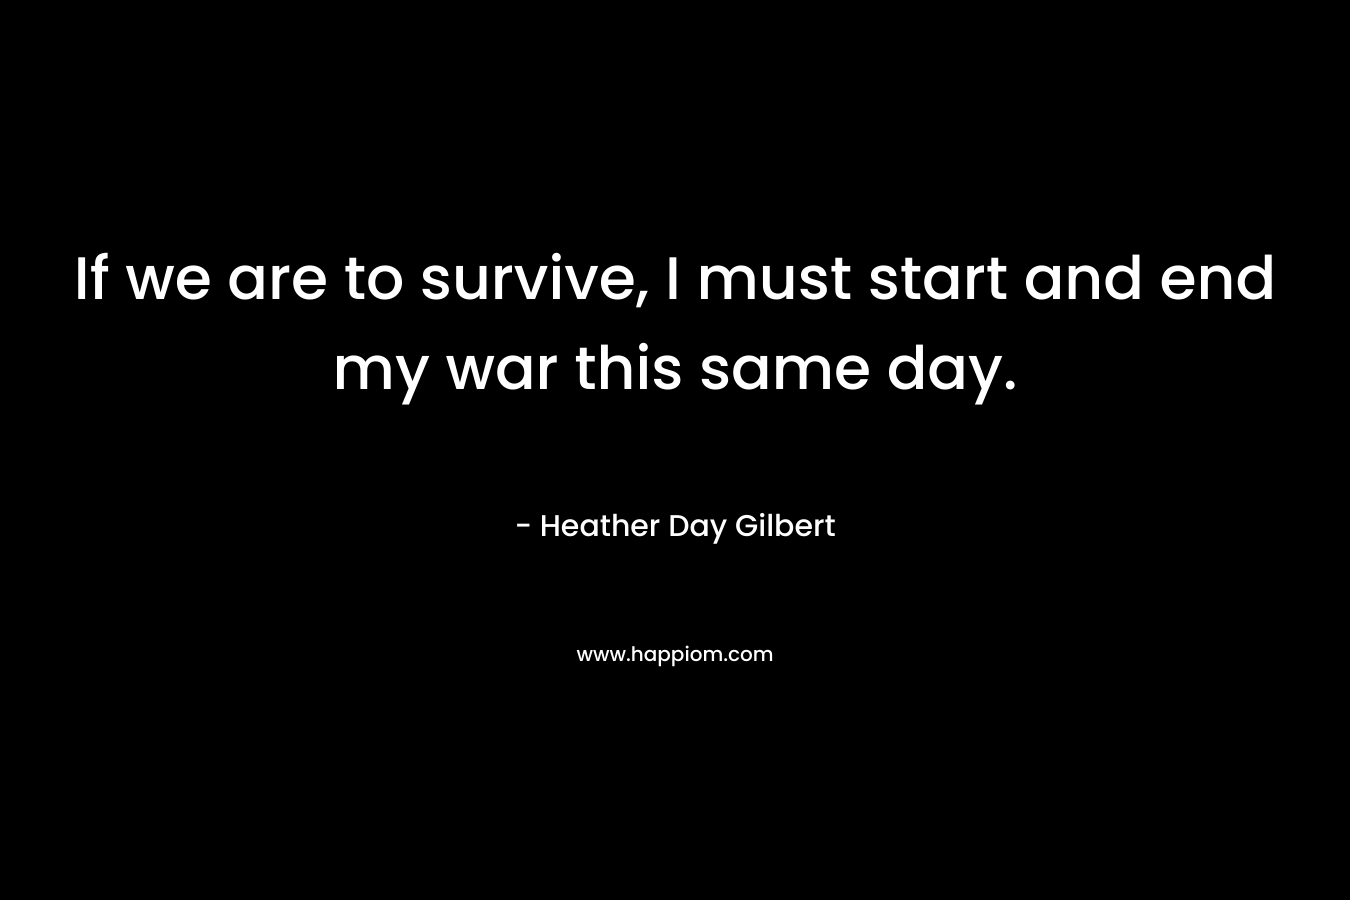 If we are to survive, I must start and end my war this same day. – Heather Day Gilbert